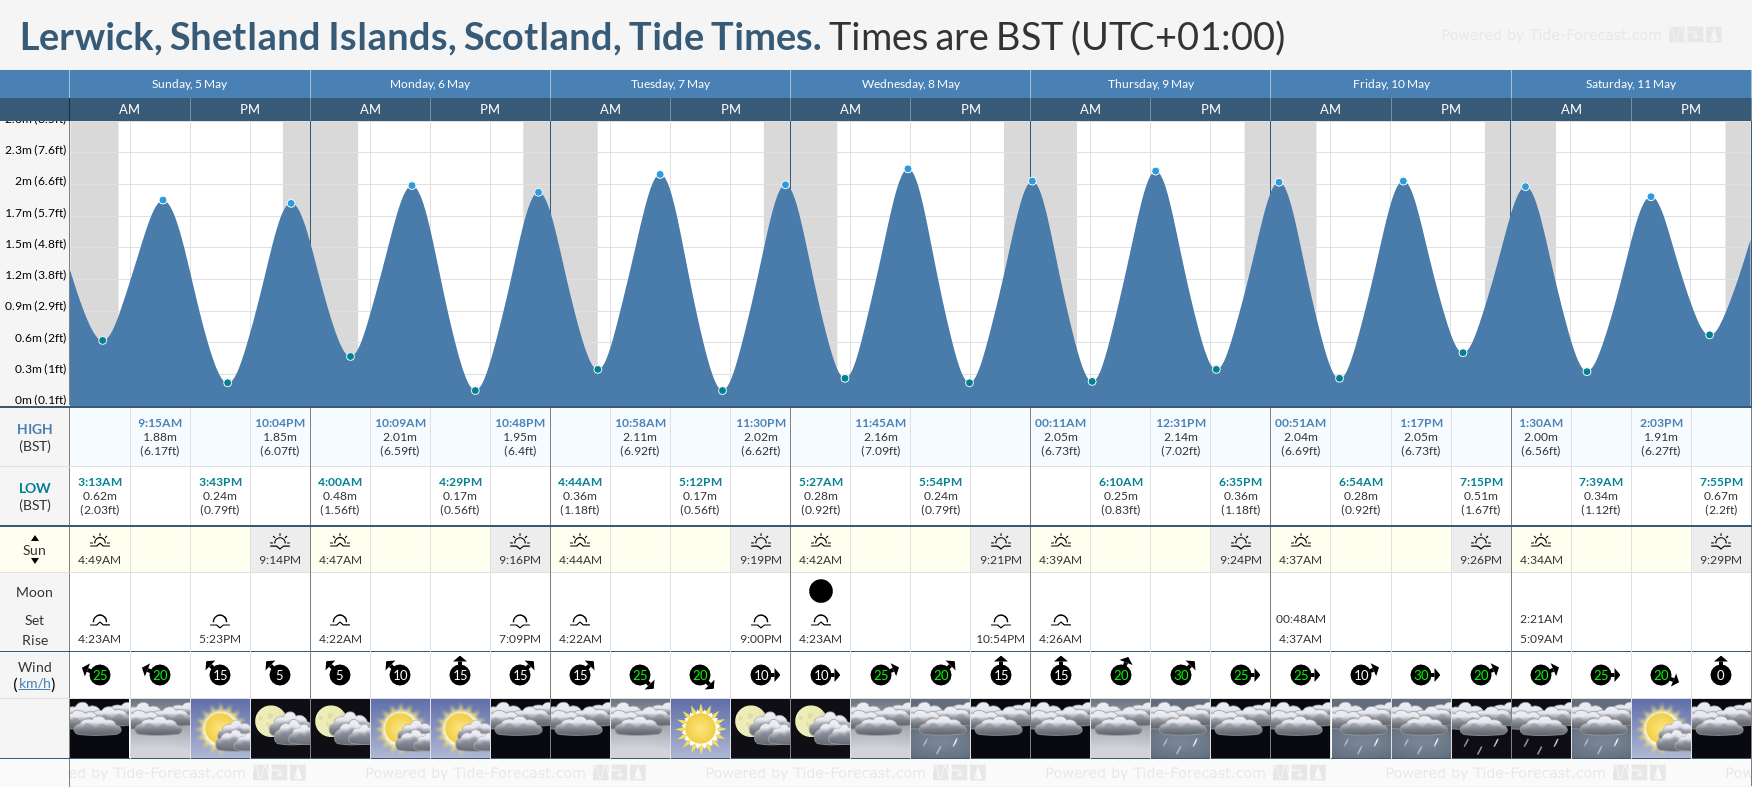 Lerwick, Shetland Islands, Scotland Tide Chart including high and low tide tide times for the next 7 days